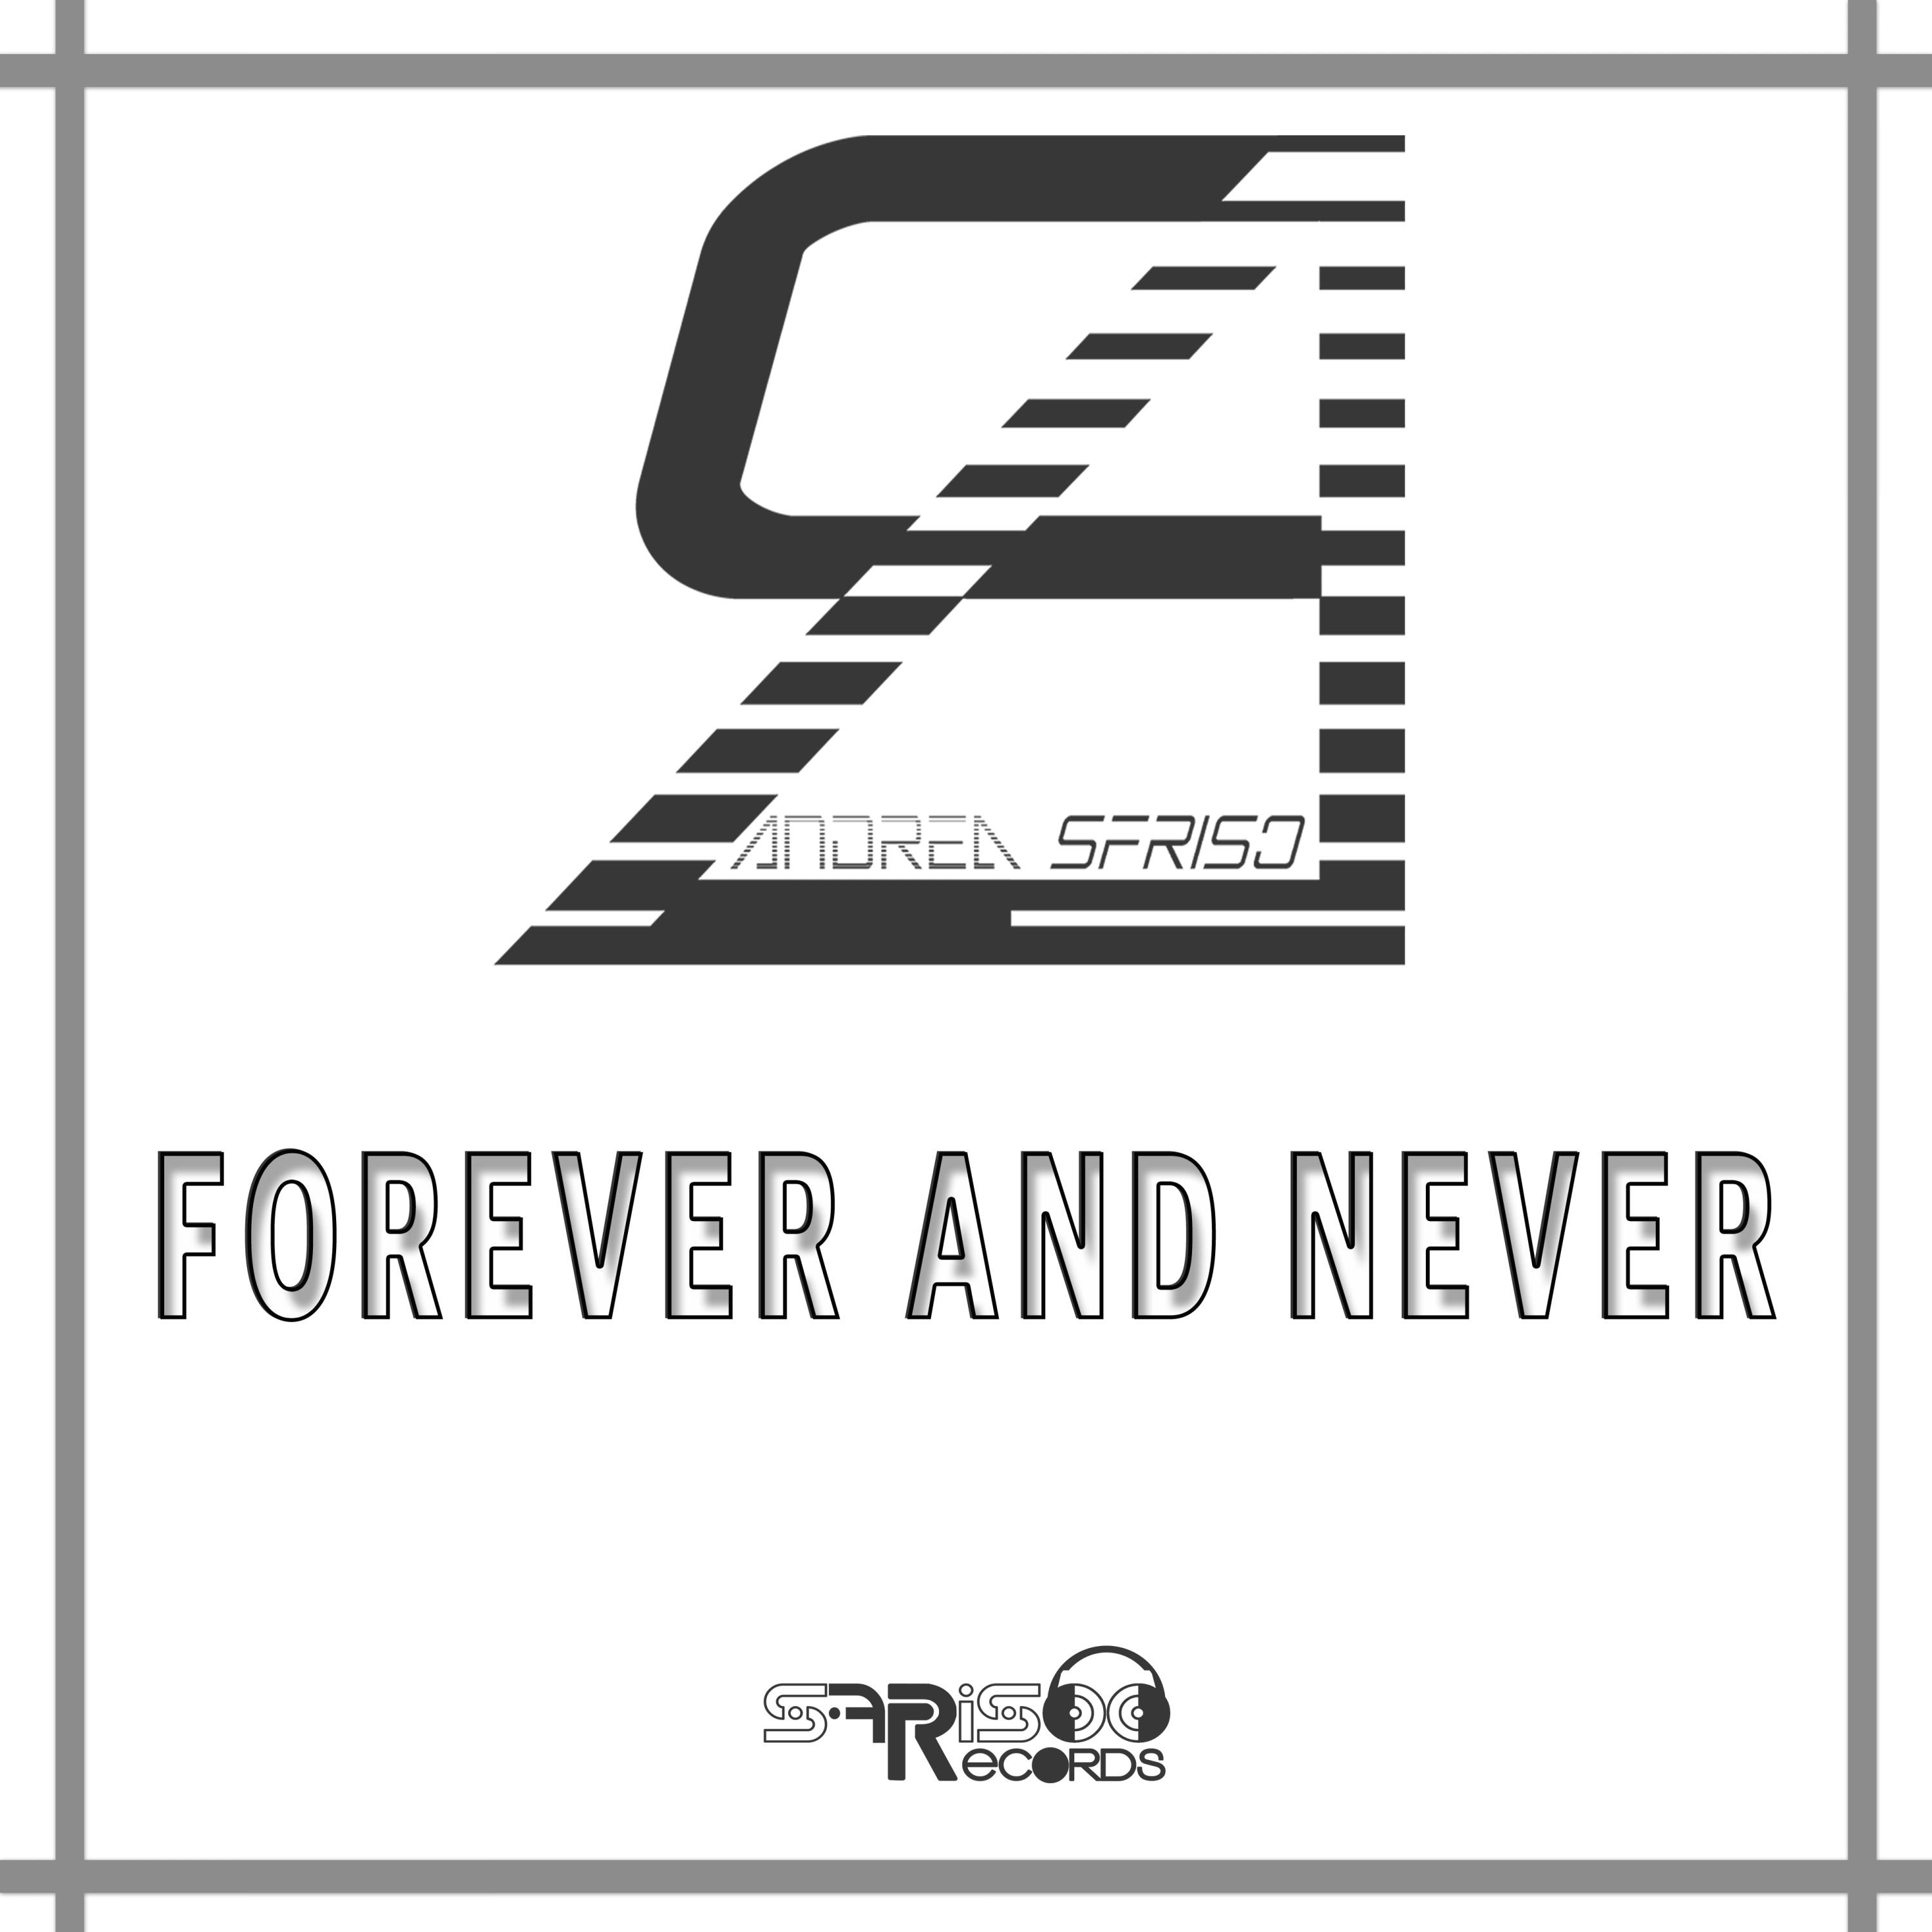 Andrea Sfriso - Forever and Never (Radio Instrumental Mix)